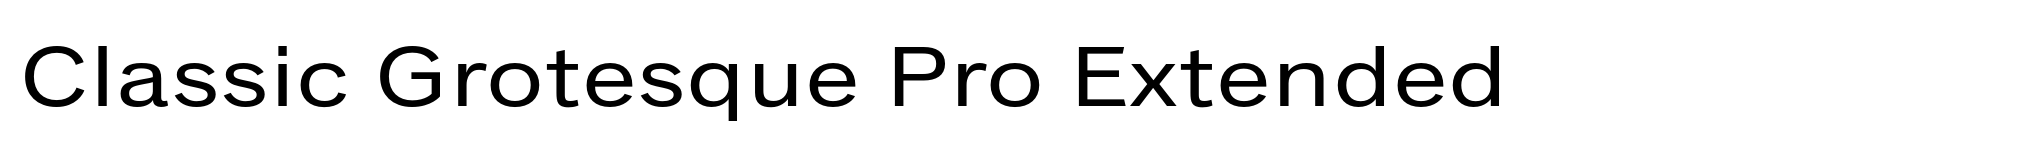 Classic Grotesque Pro Extended image